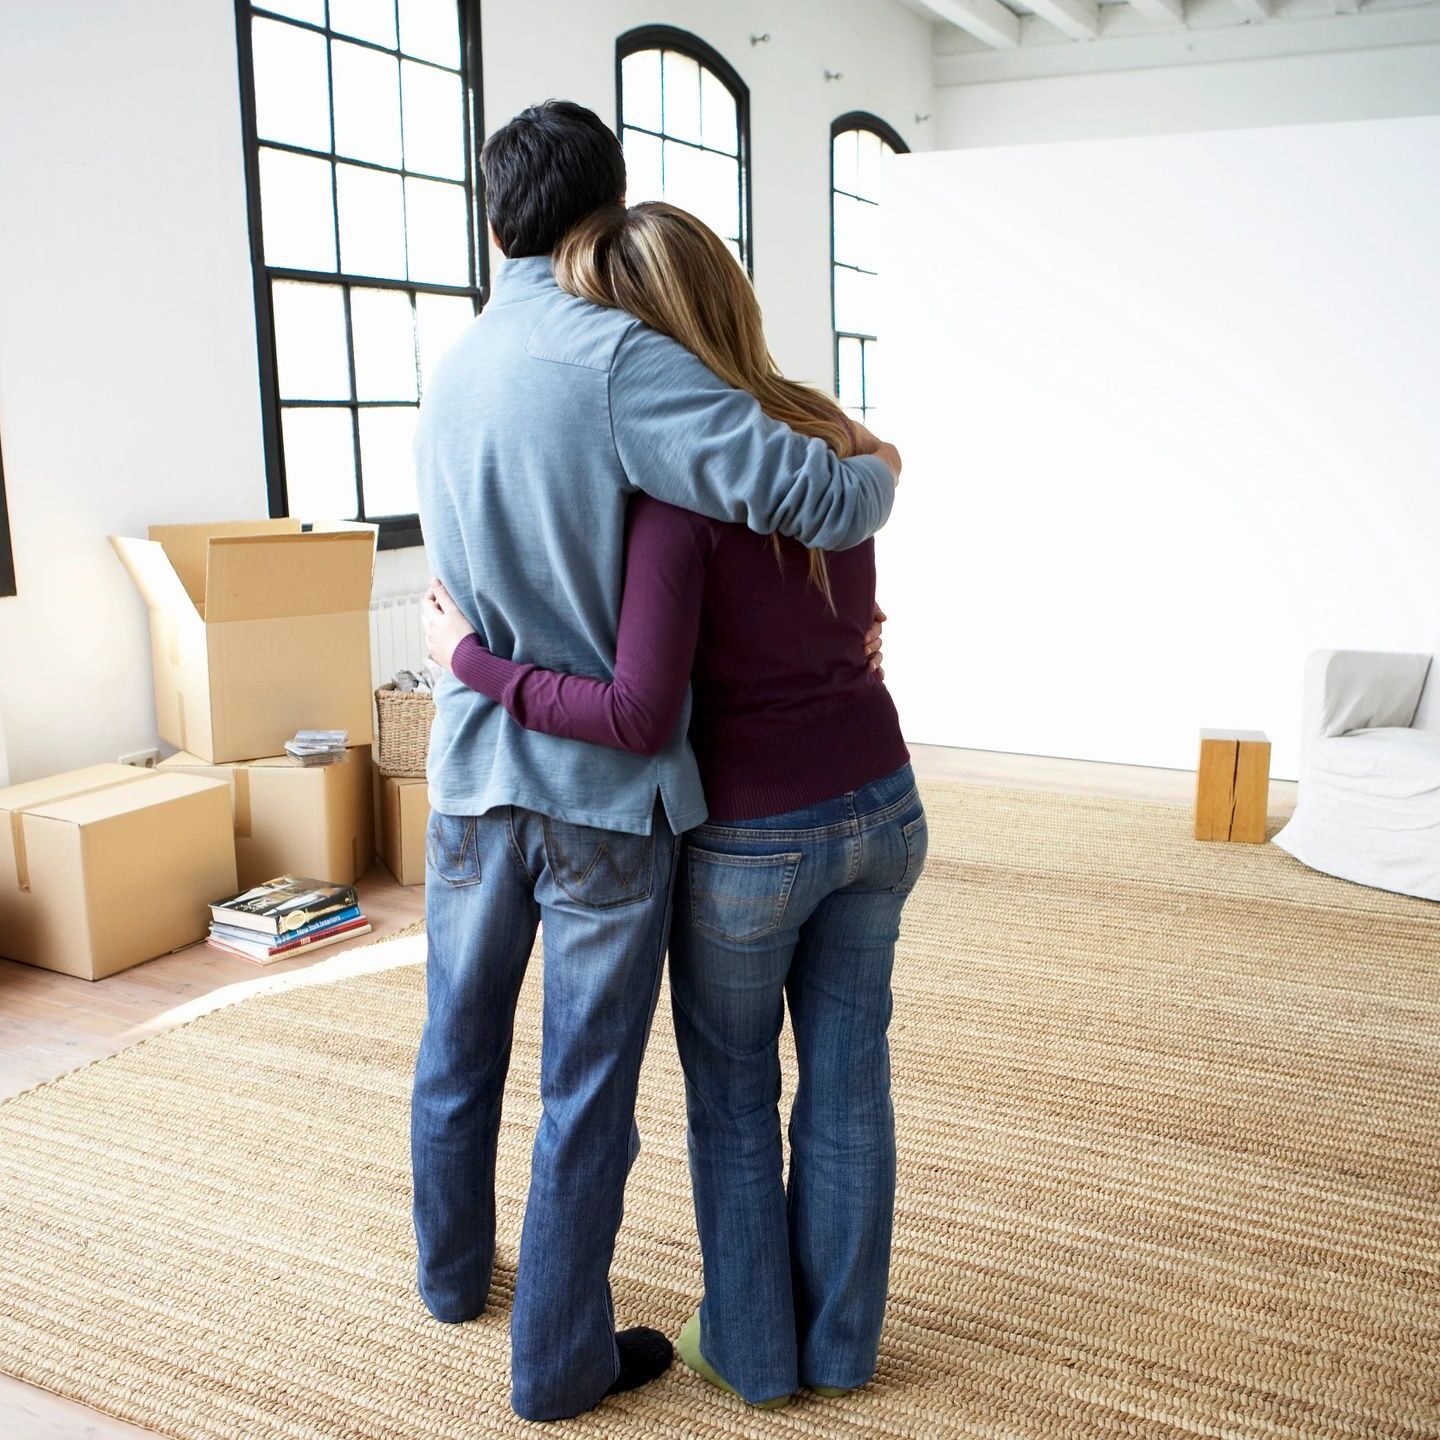 Couple hugging in new apartment surrounded by boxes